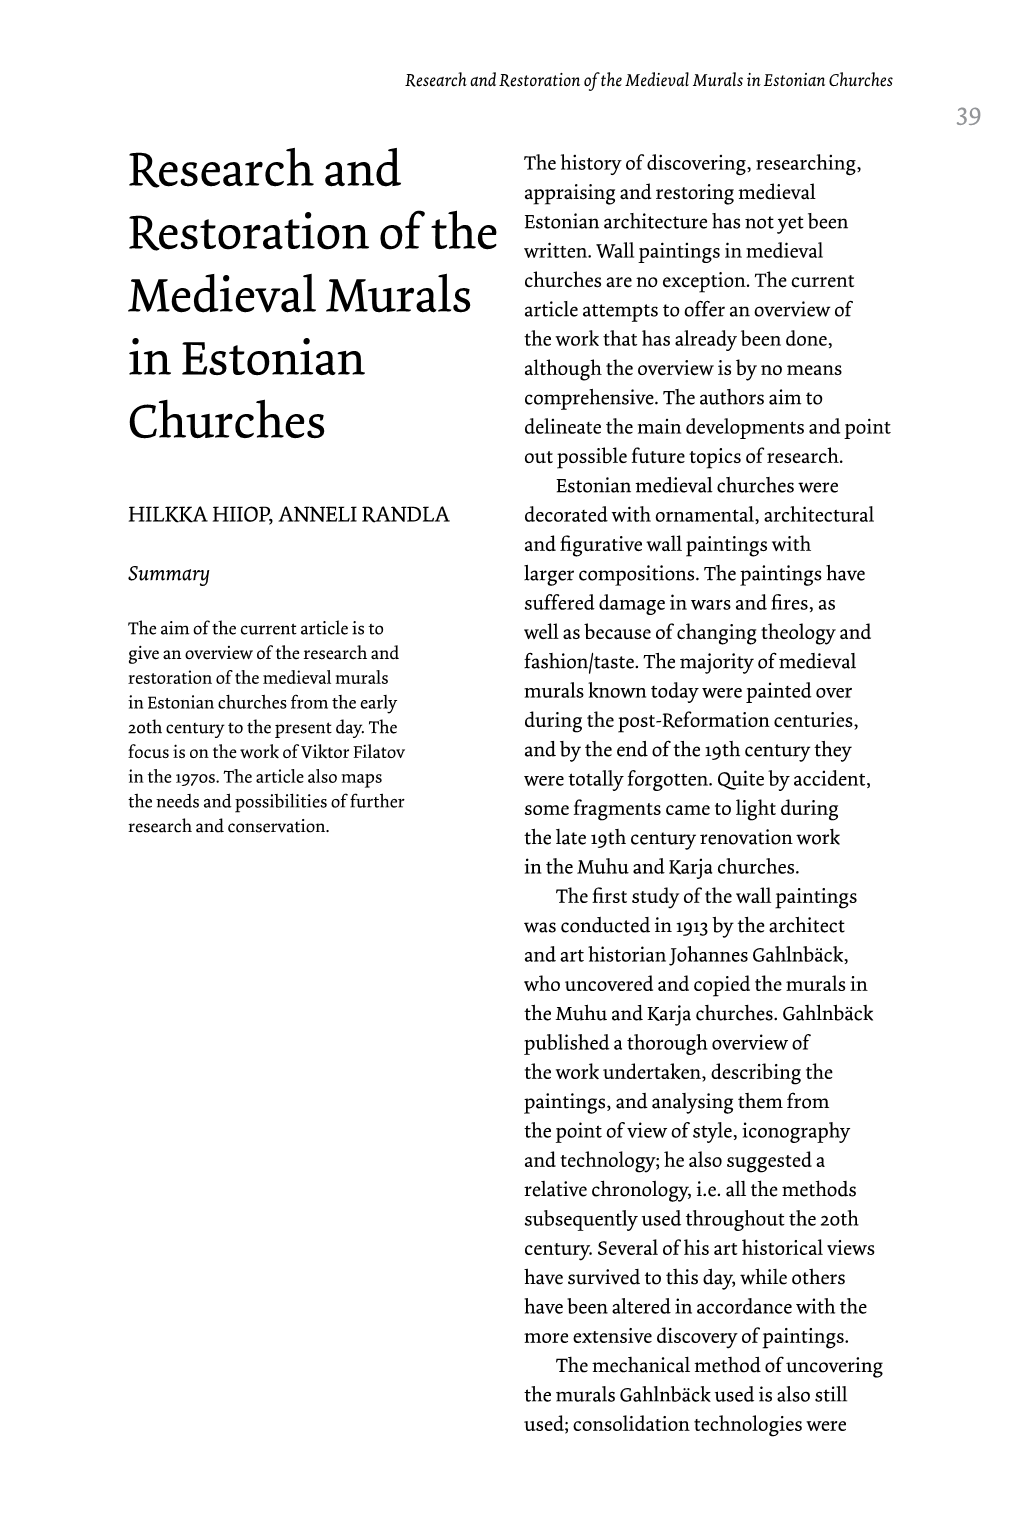 Research and Restoration of the Medieval Murals in Estonian Churches 39